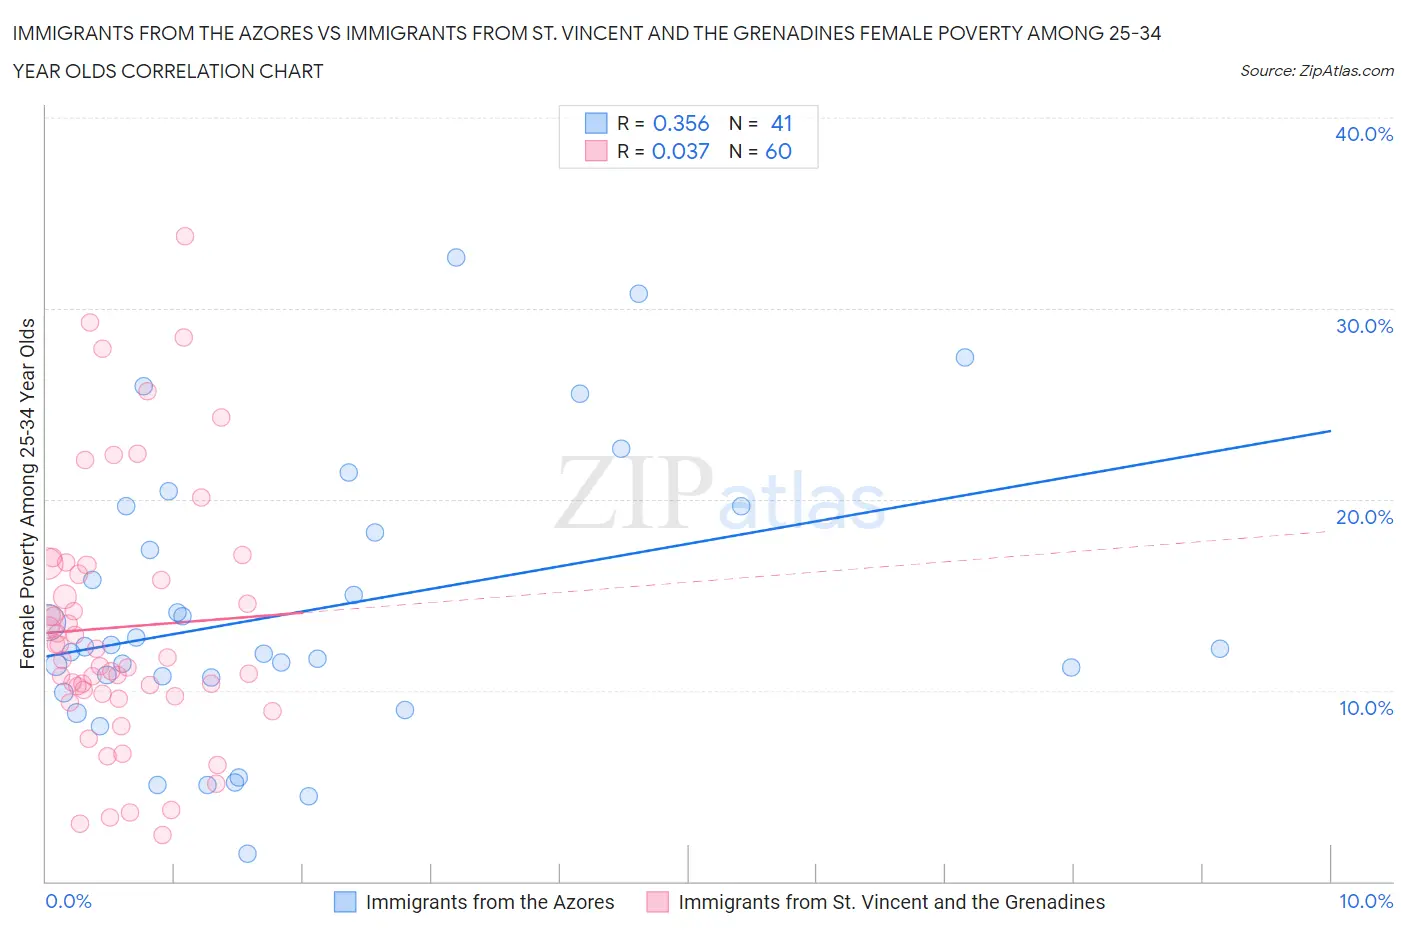 Immigrants from the Azores vs Immigrants from St. Vincent and the Grenadines Female Poverty Among 25-34 Year Olds